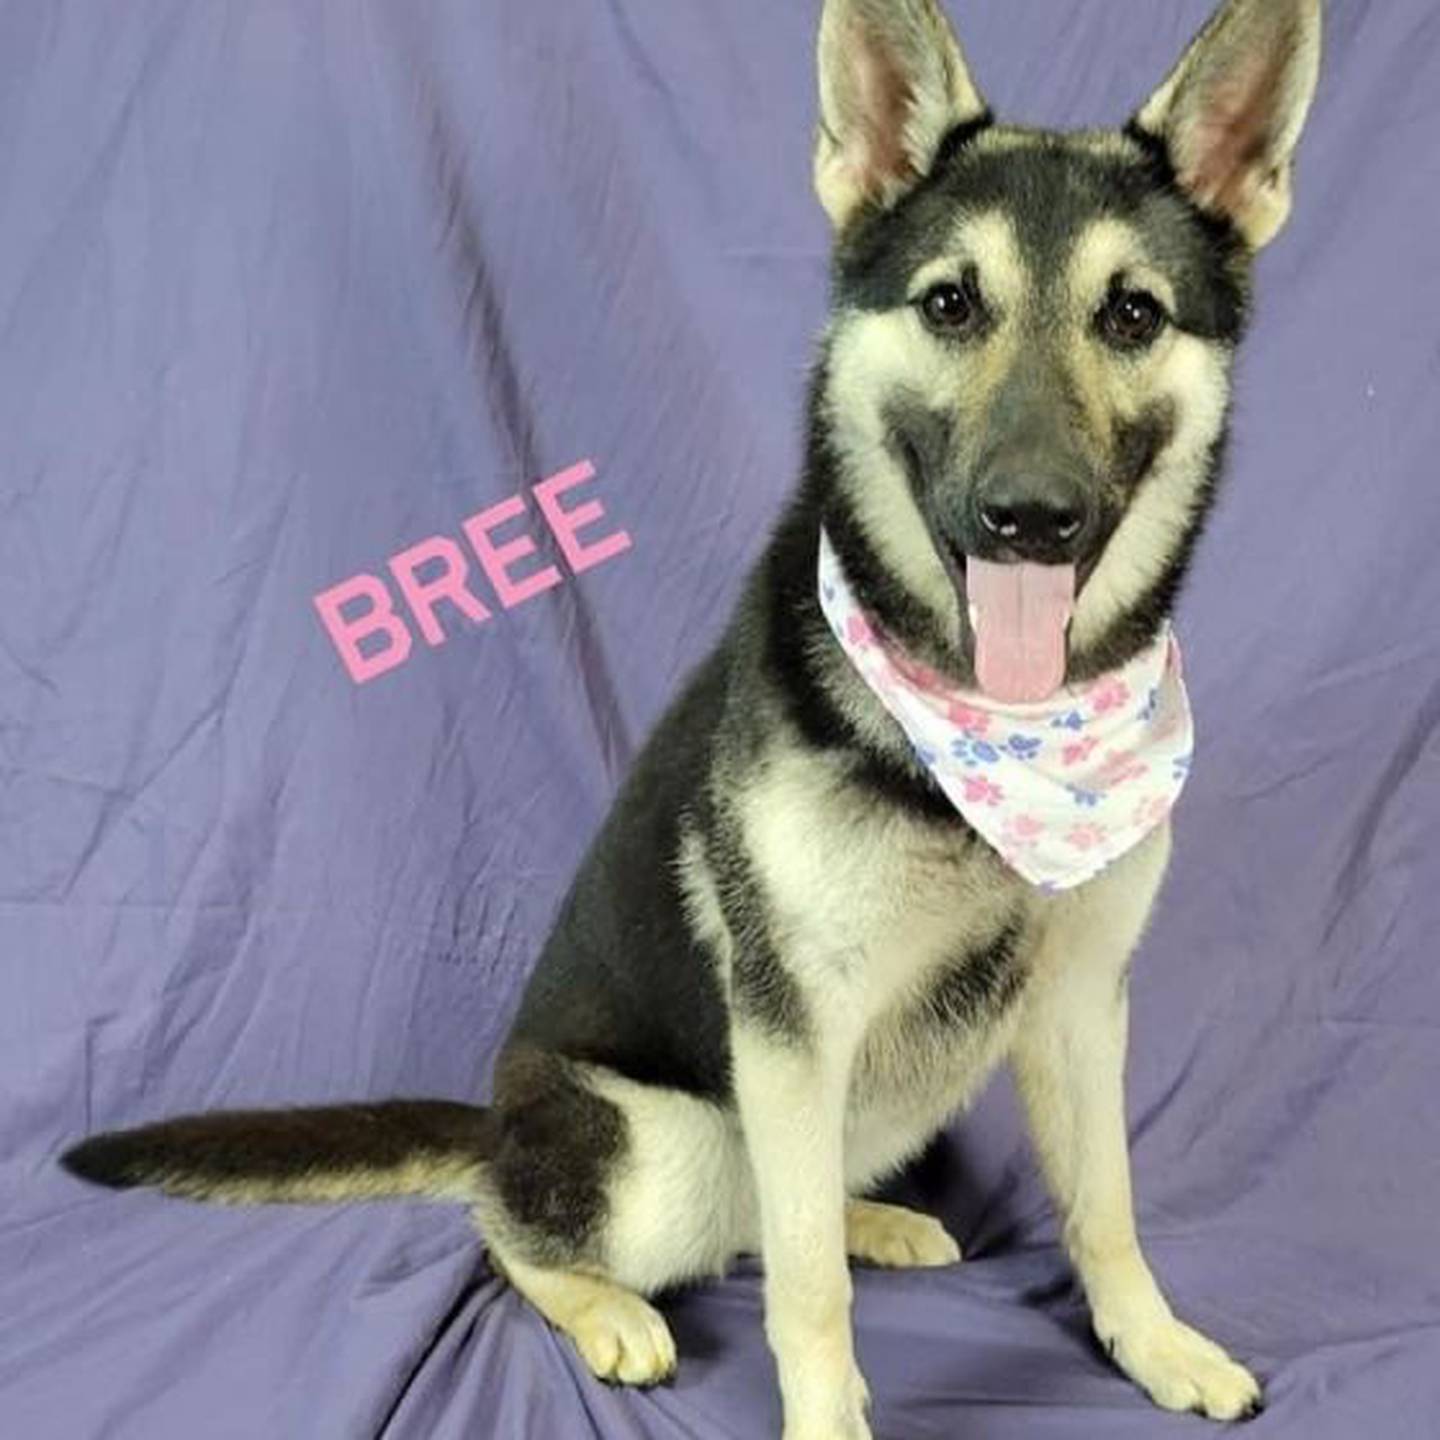 Bree is an 18-montn-old sweet shepherd mix who loves everyone she meets and is good with all dogs. To meet Bree, contact Hopeful Tails Animal Rescue at hopefultailsadoptions@outlook.com. Visit hopefultailsanimalrescue.org.